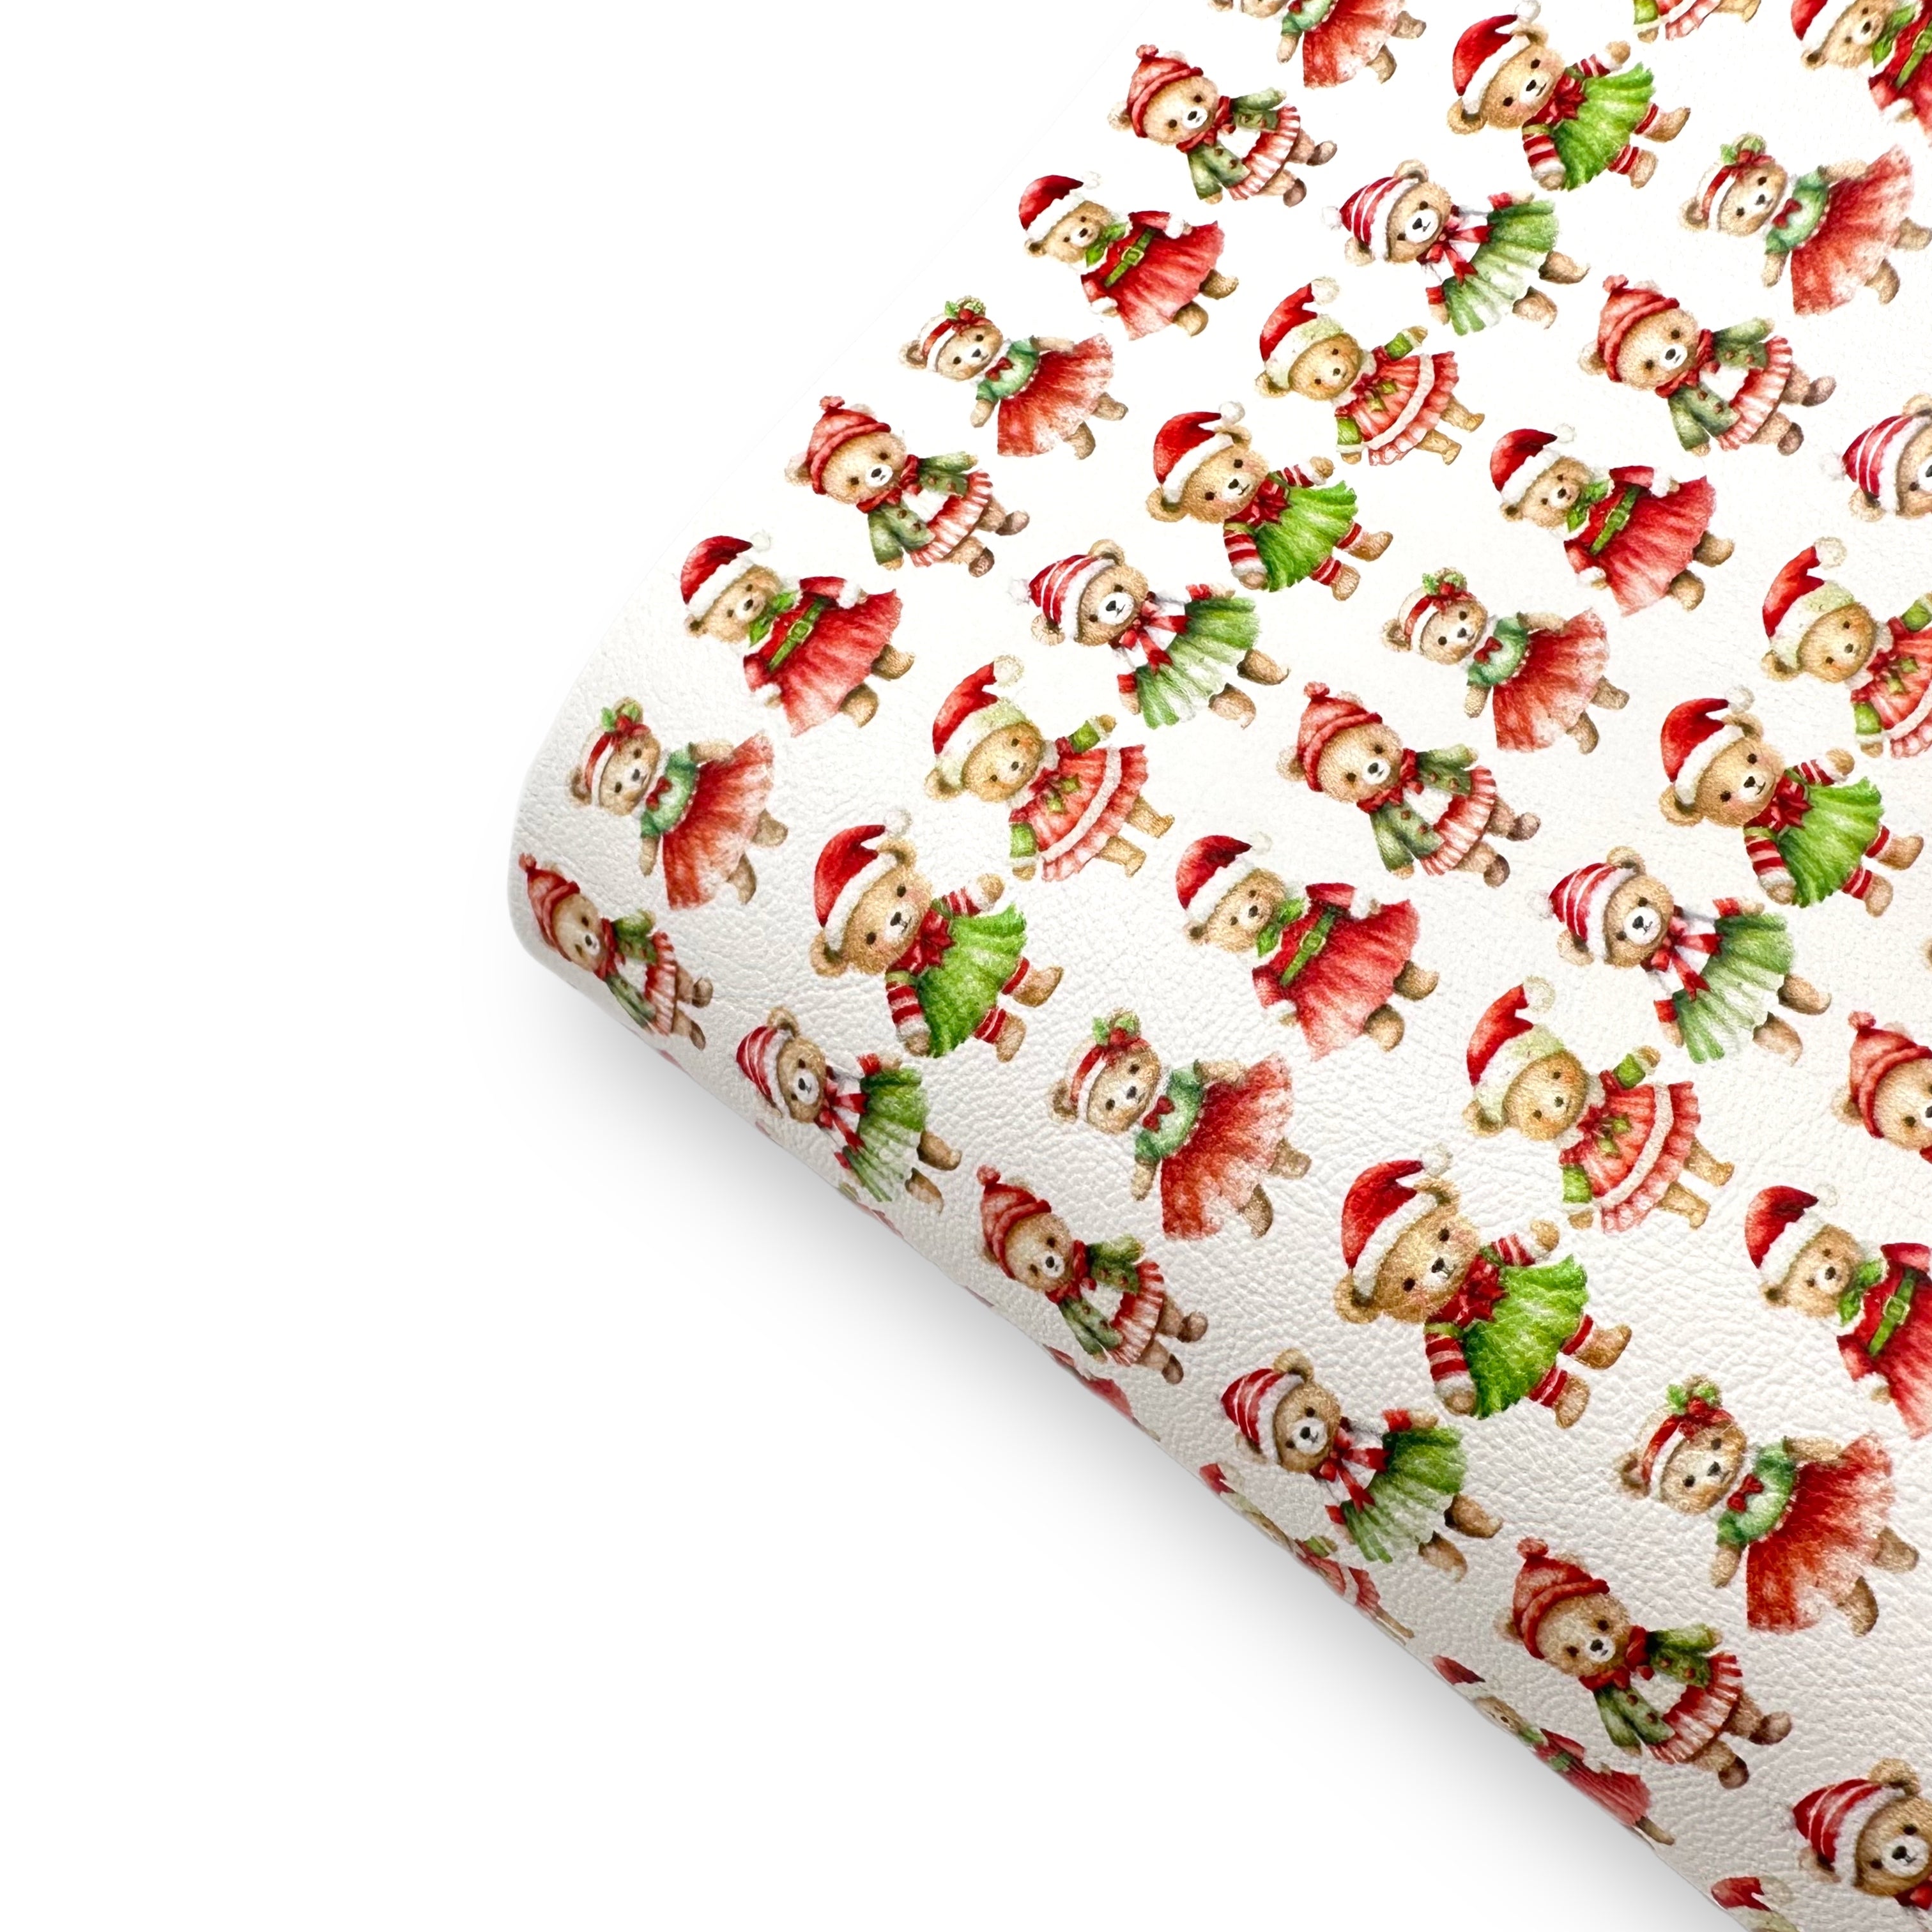 Teddy's Christmas Party Premium Faux Leather Fabric Sheets